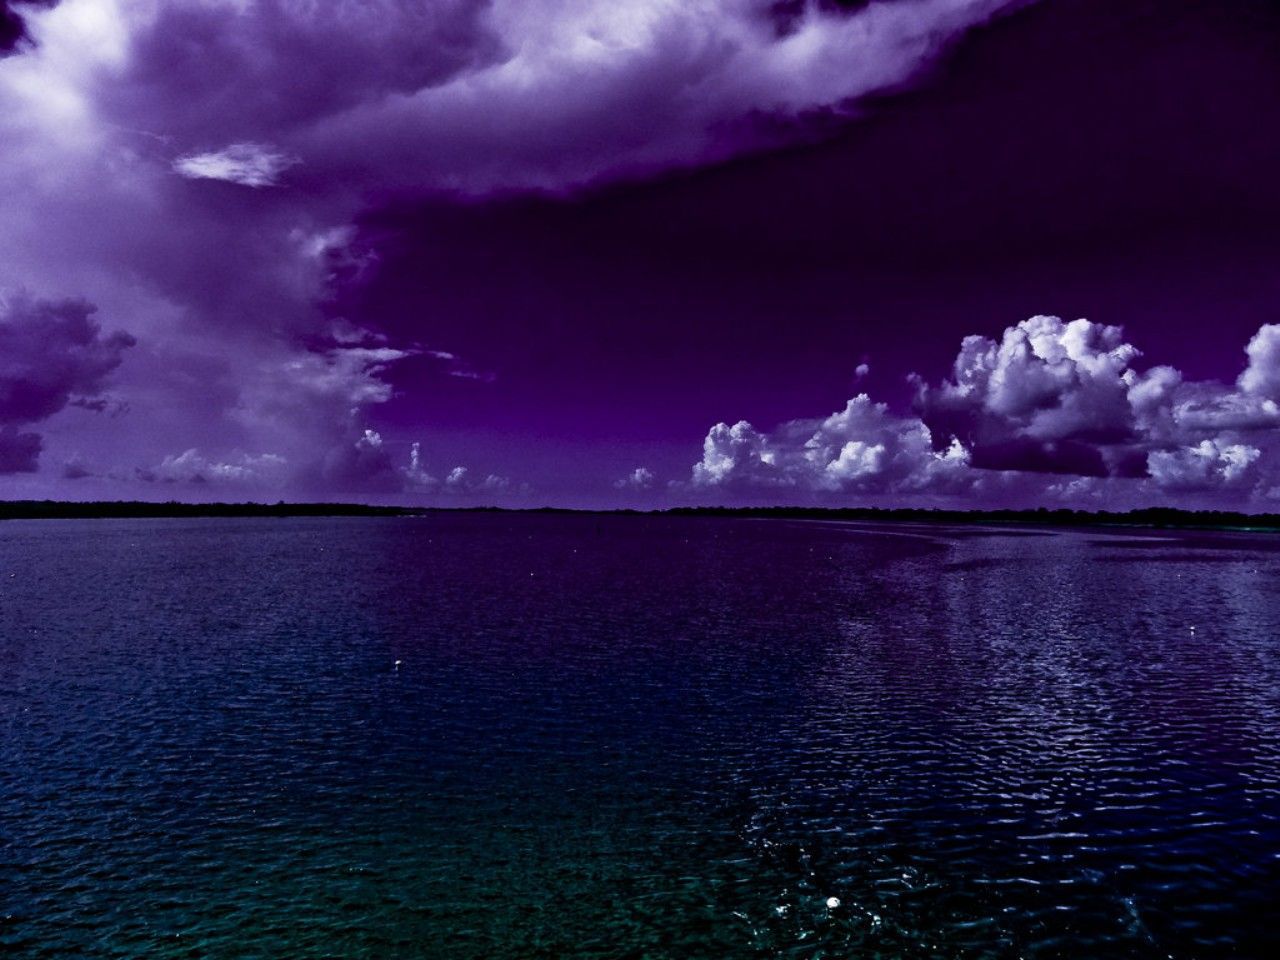 Purple Sunset Reflected In The Ocean Wallpapers